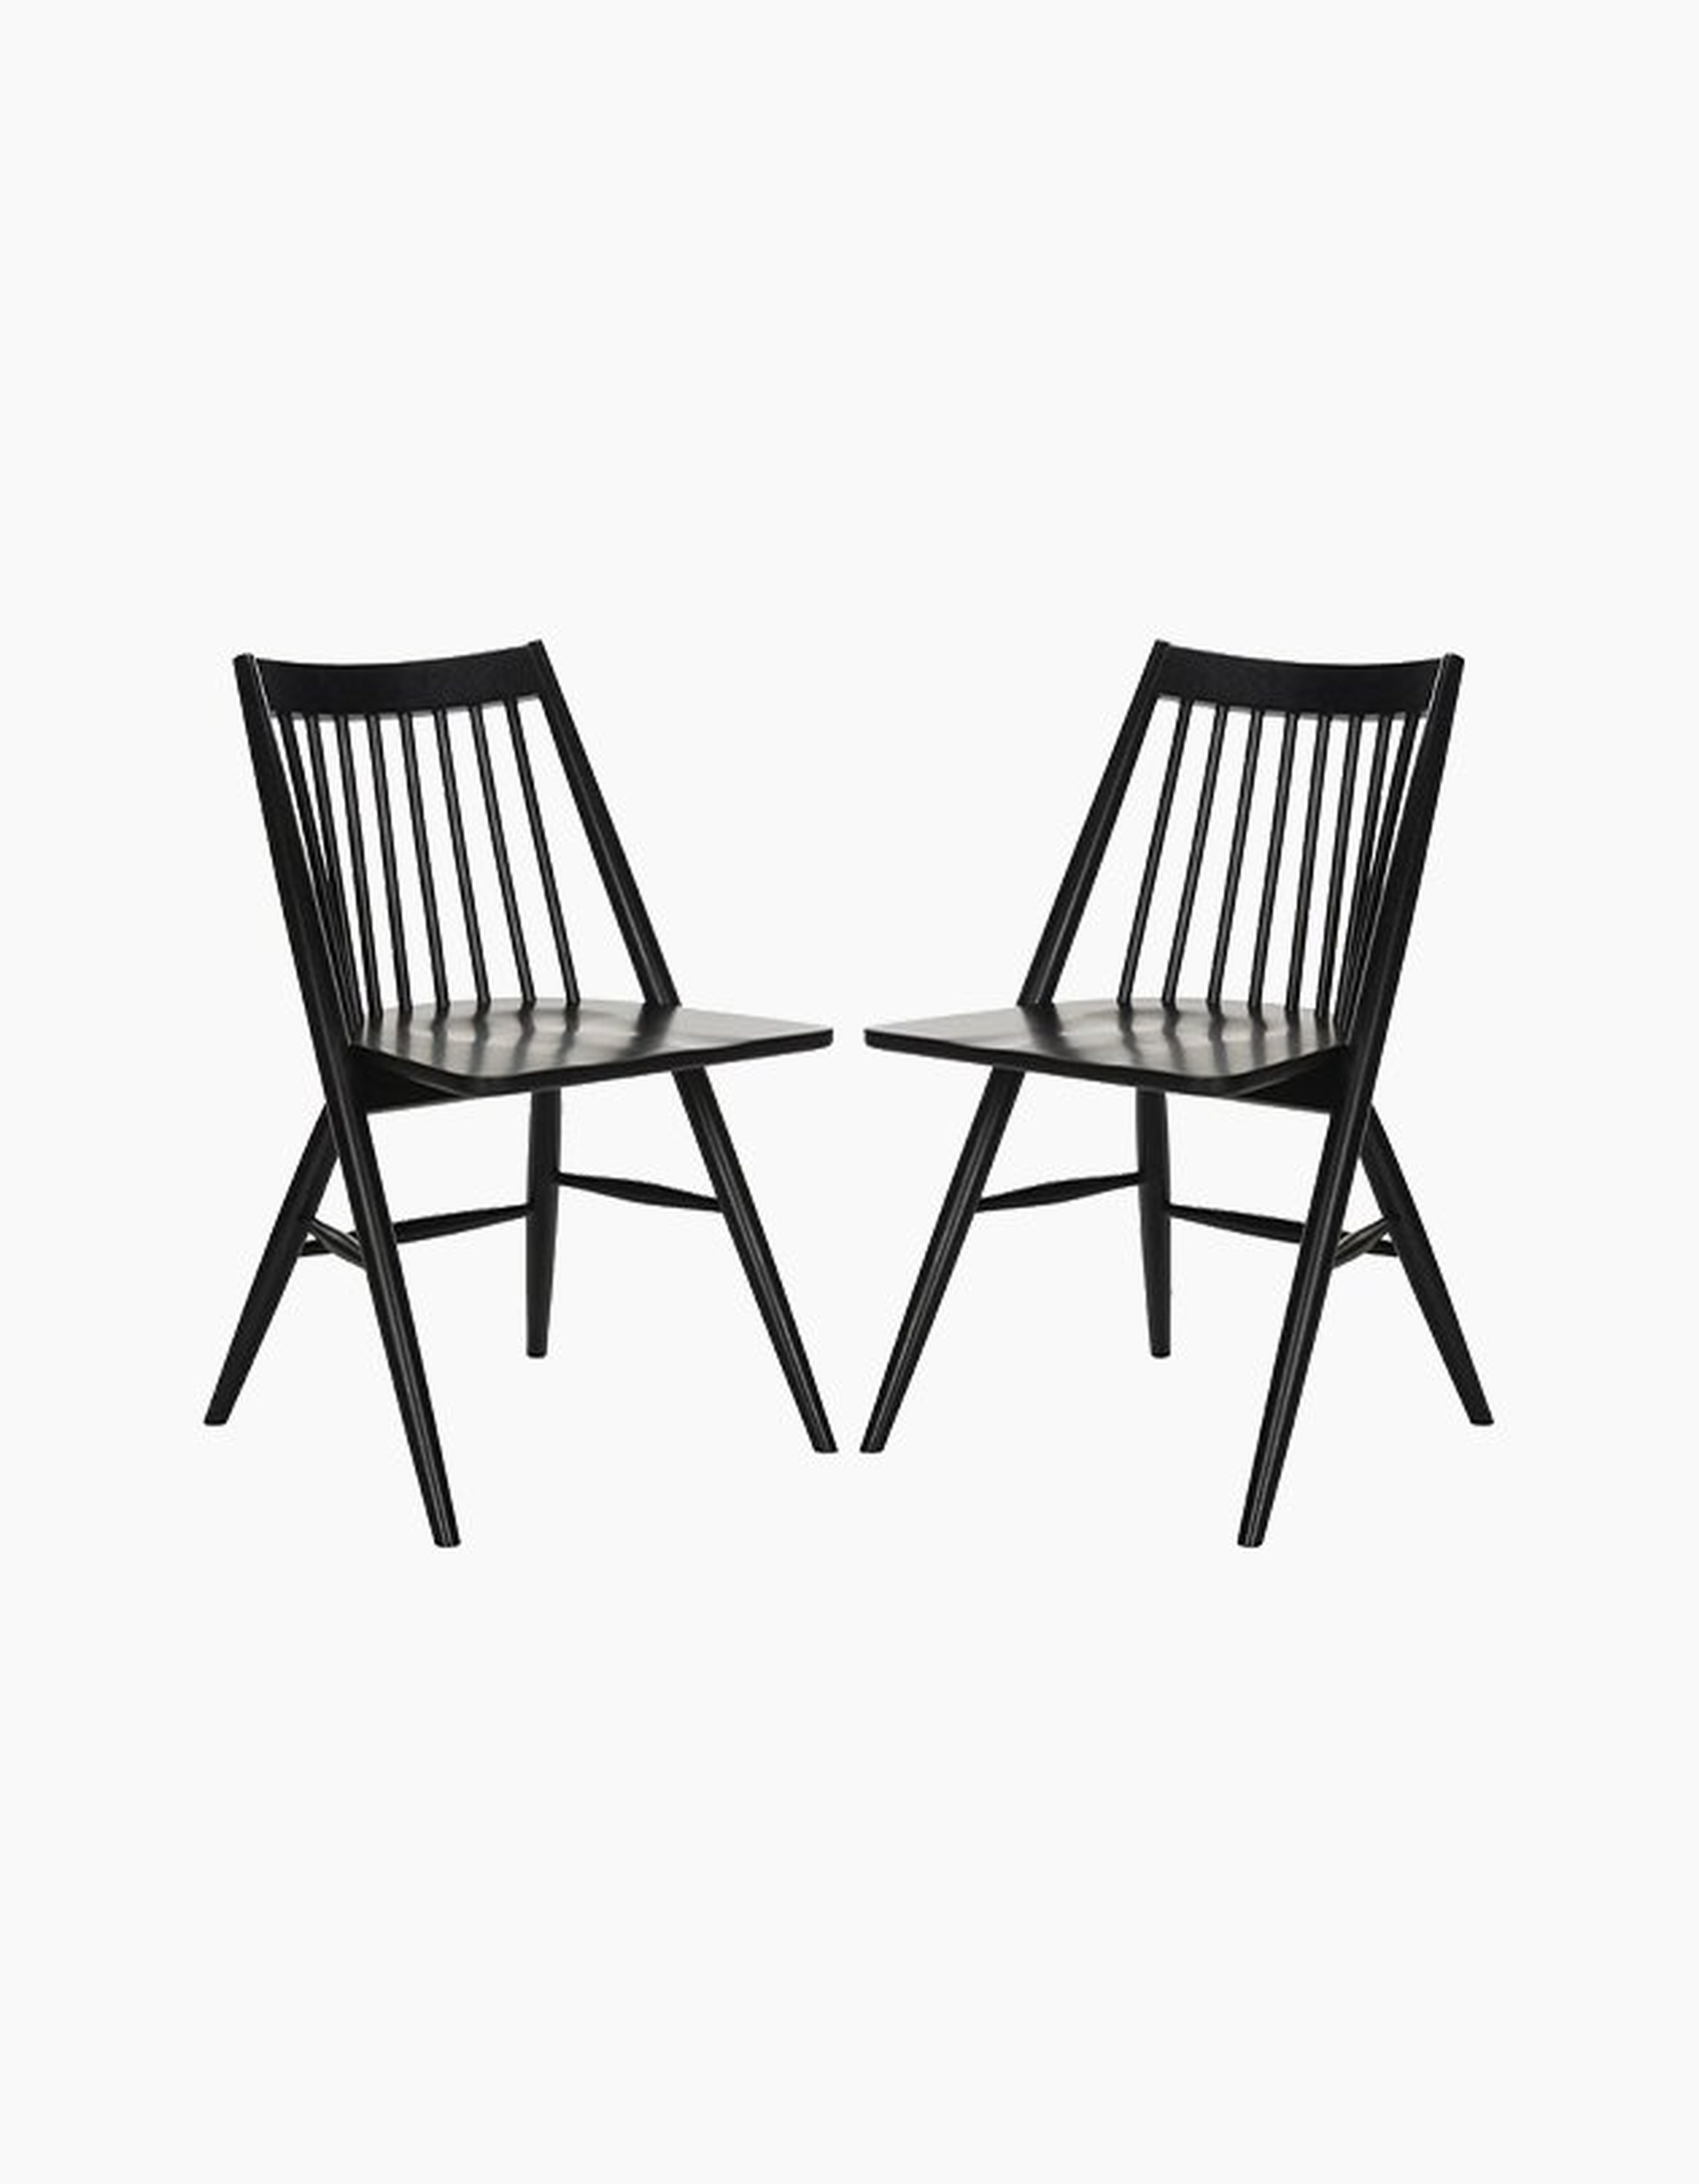 Wren 19"H Spindle Dining Chair - Black - Safavieh - Arlo Home